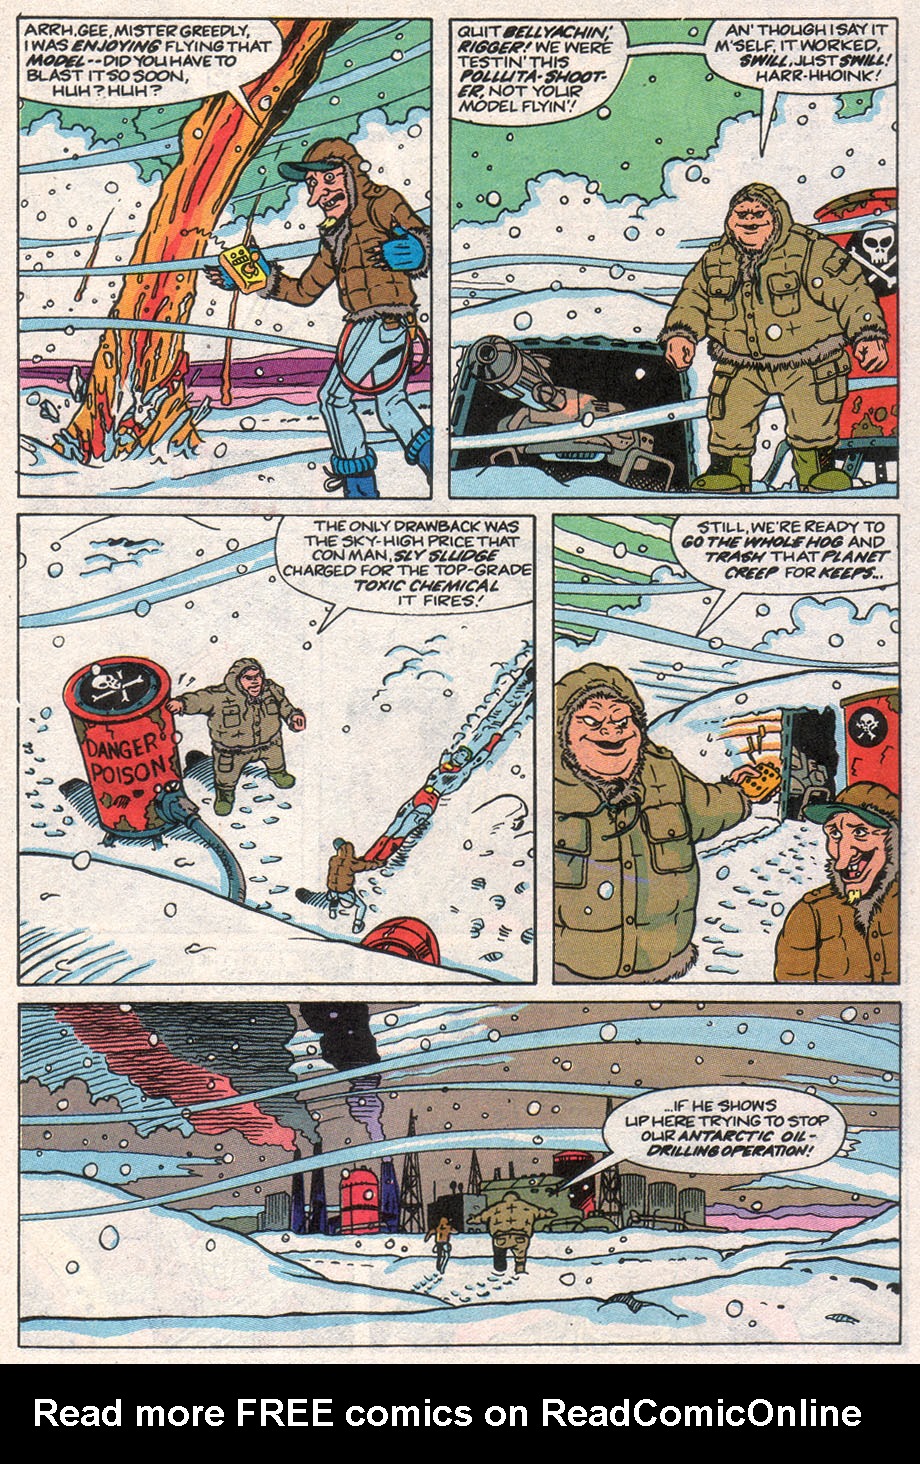 Captain Planet and the Planeteers 10 Page 16